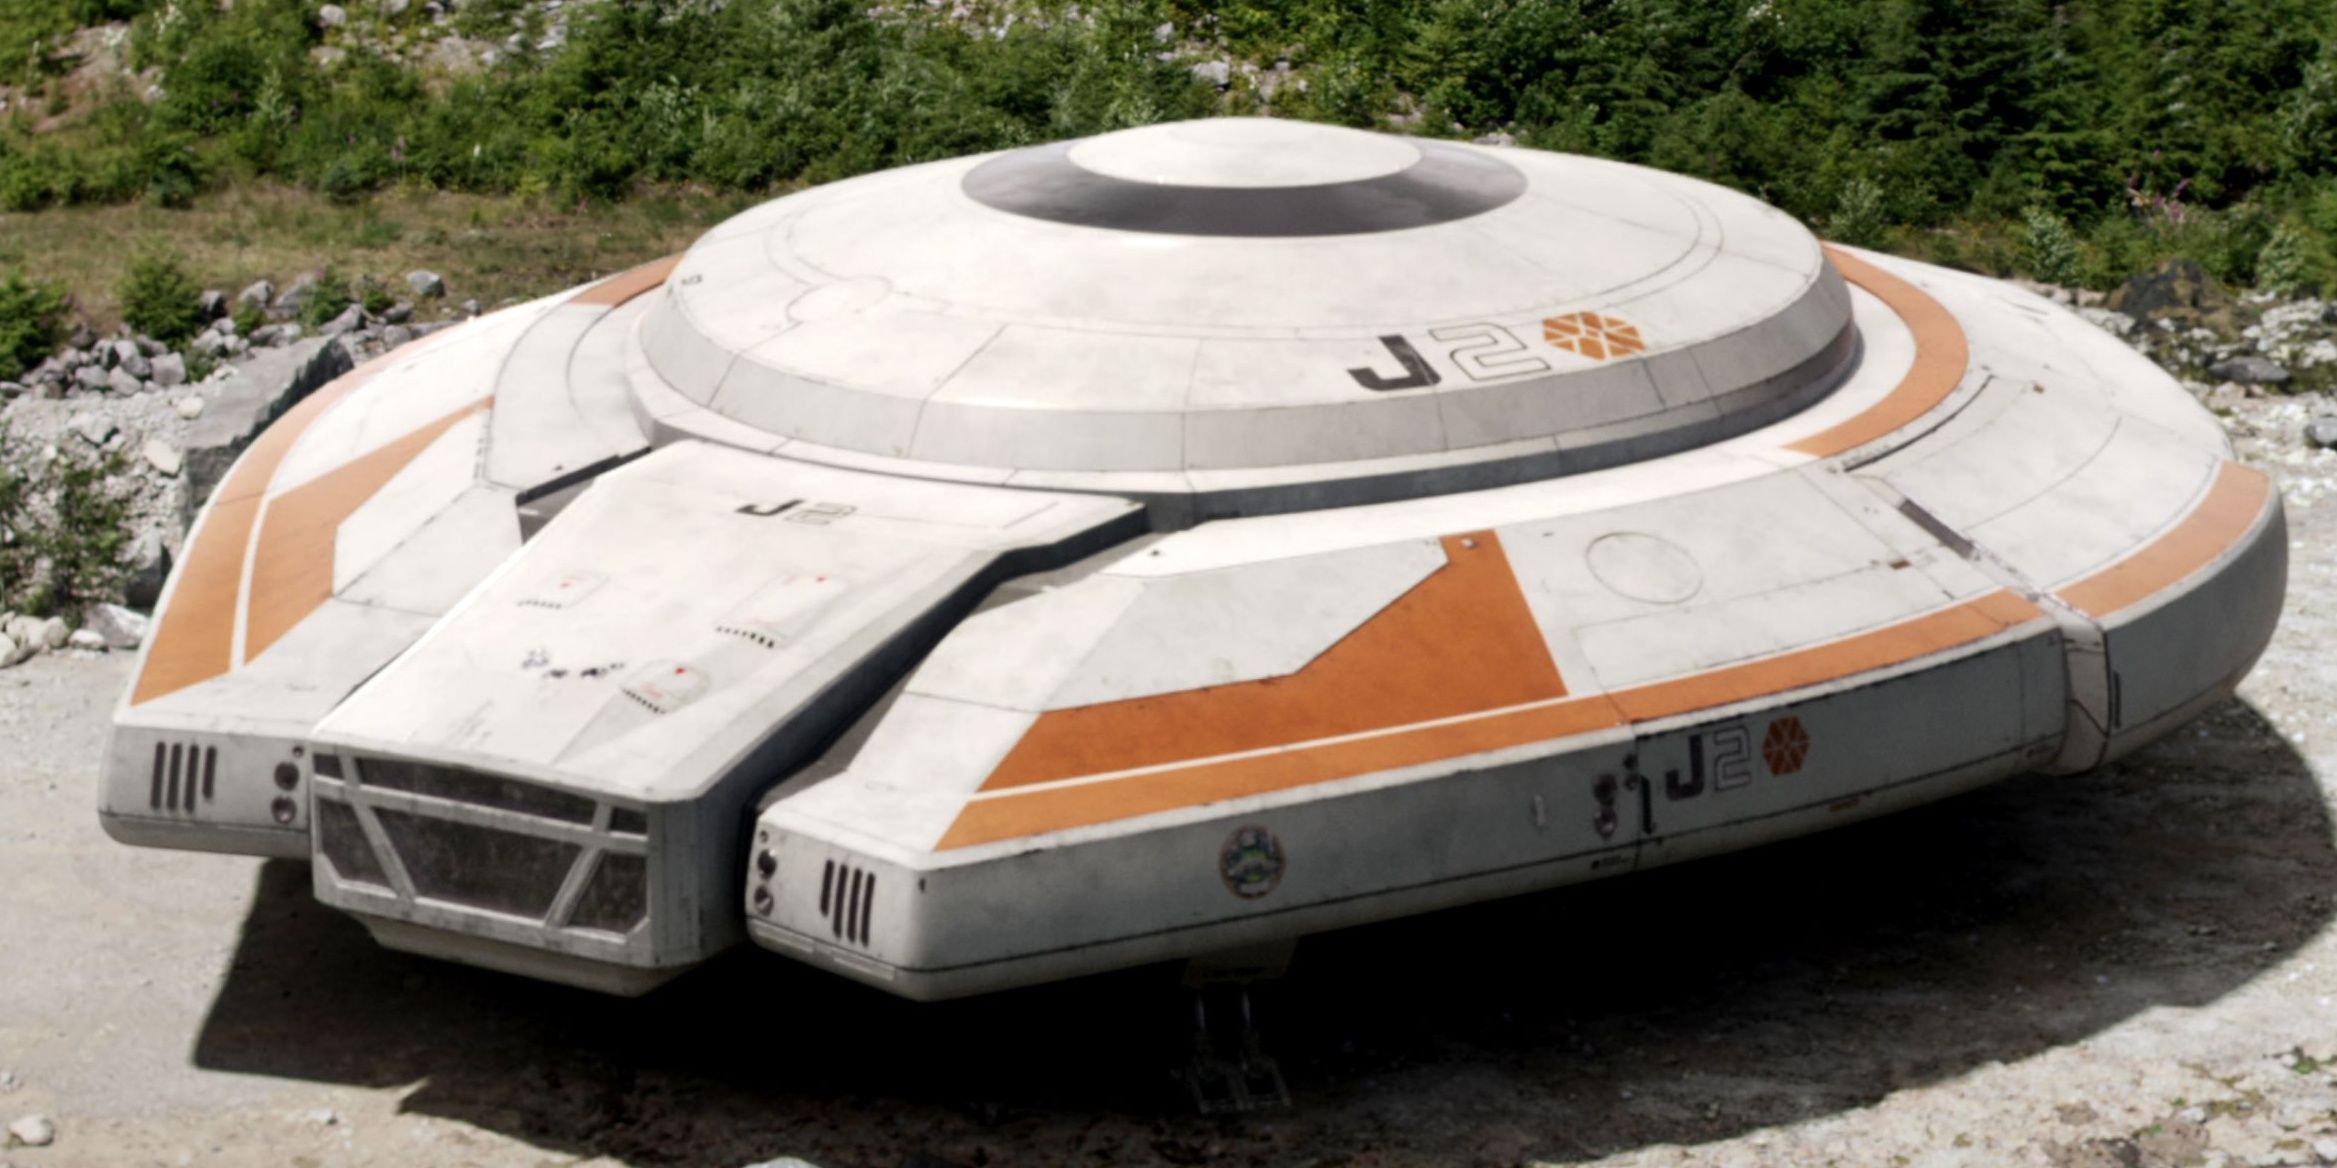 The Jupiter 2 sits in the forest area of the unknown planet in Lost In Space Season 1